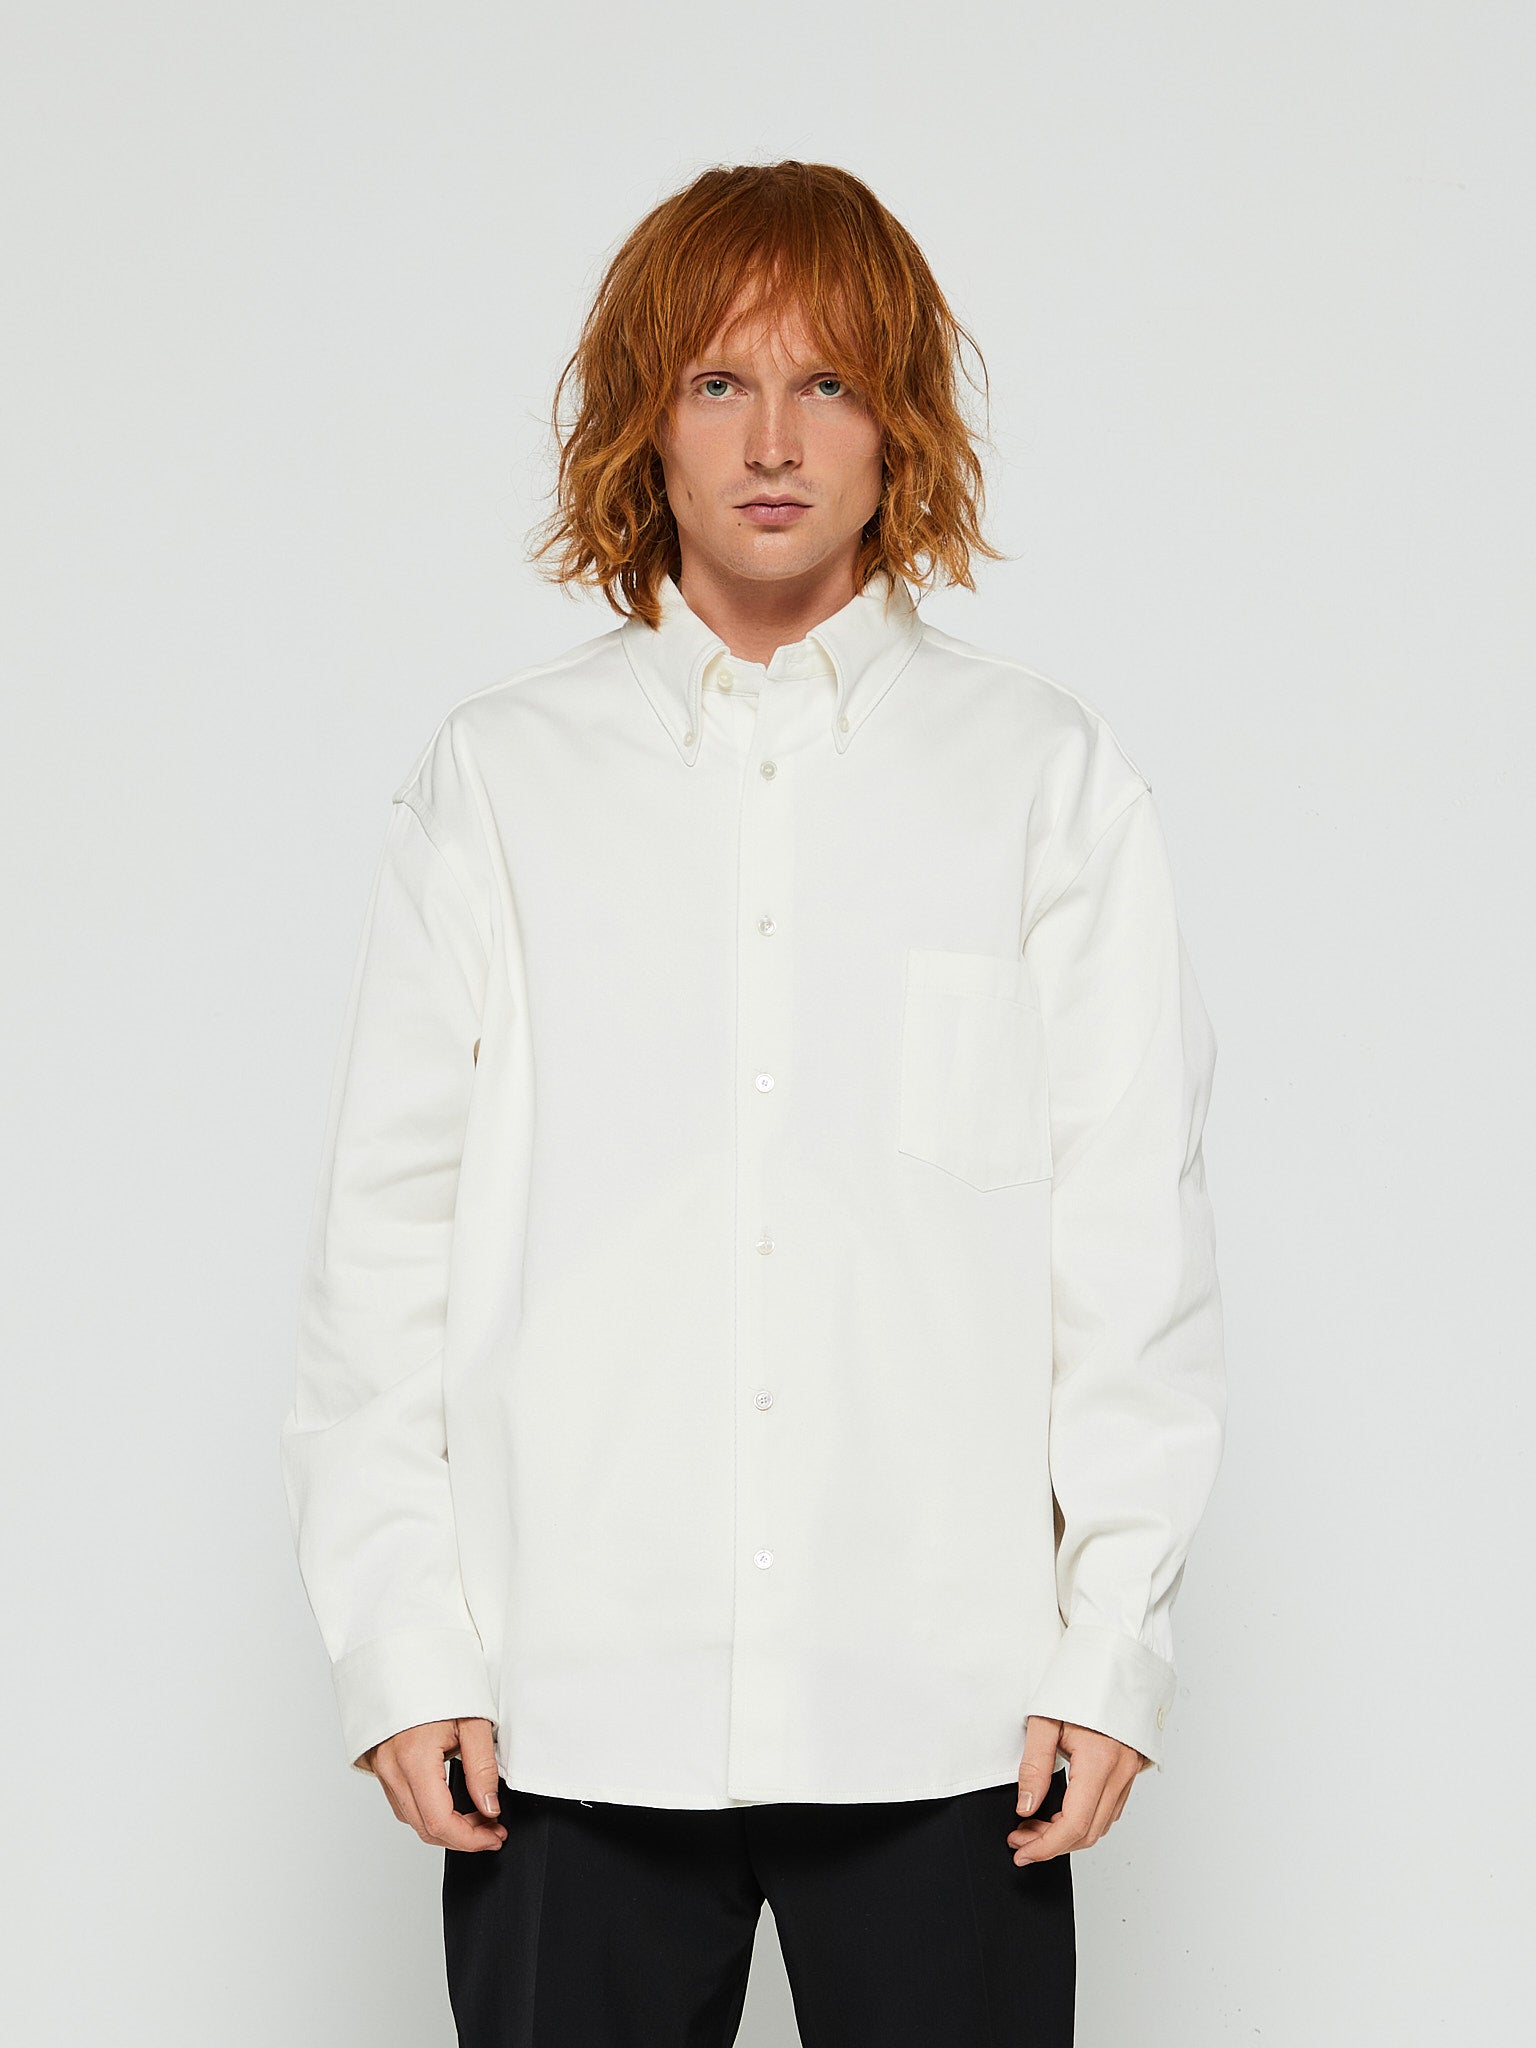 Acne Studios - Button-Up Overshirt in White